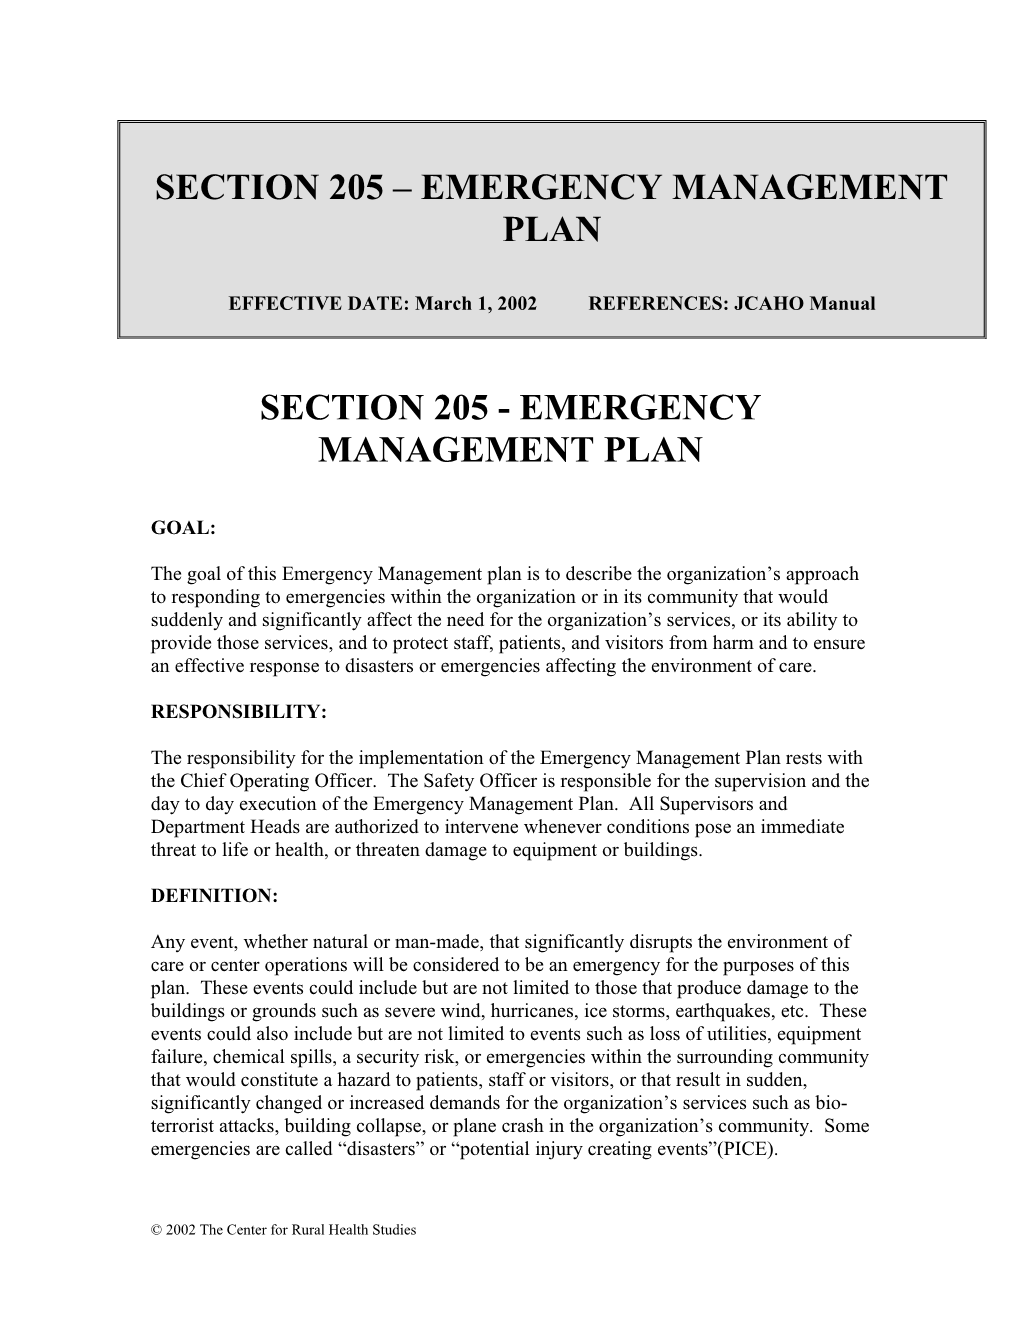 Section 205 Emergency Management Plan